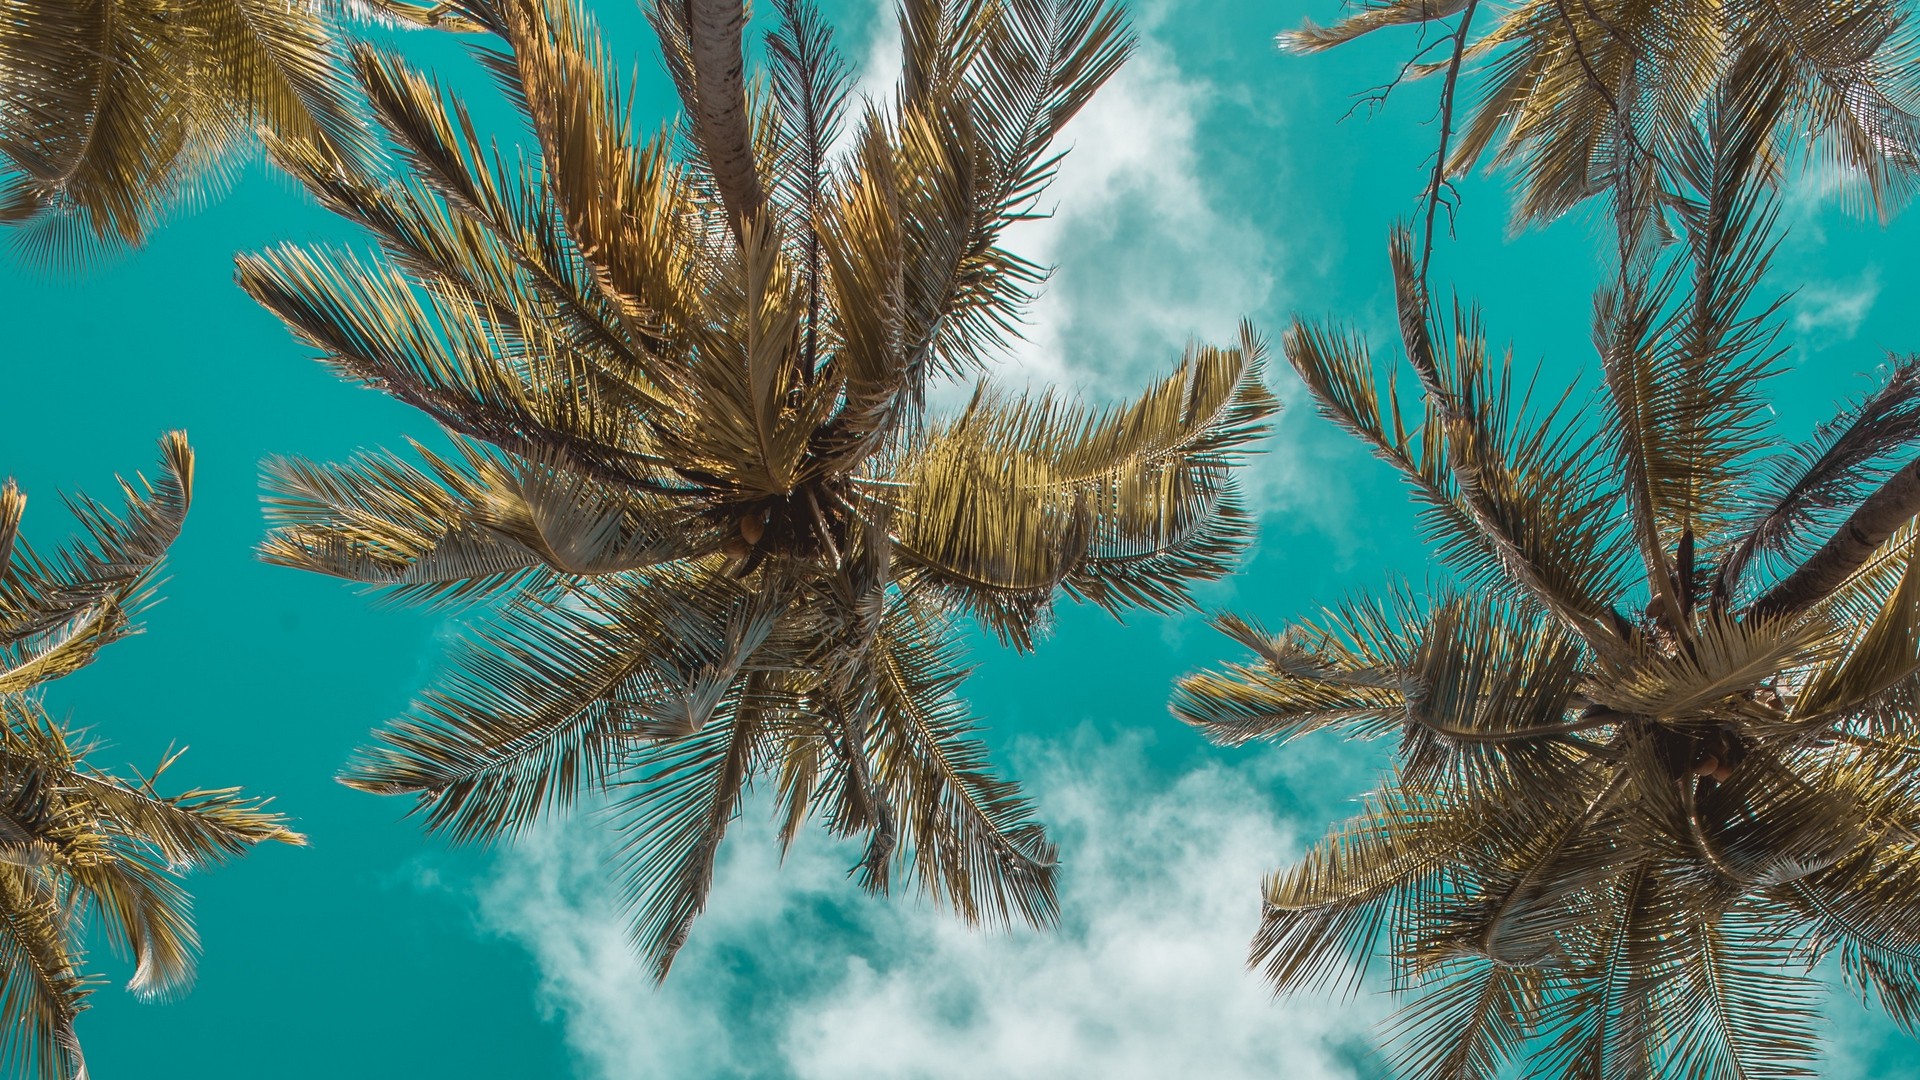 1920x1080 wallpapers: palm trees, bottom view, clouds, sky, tropics, leaves (image)